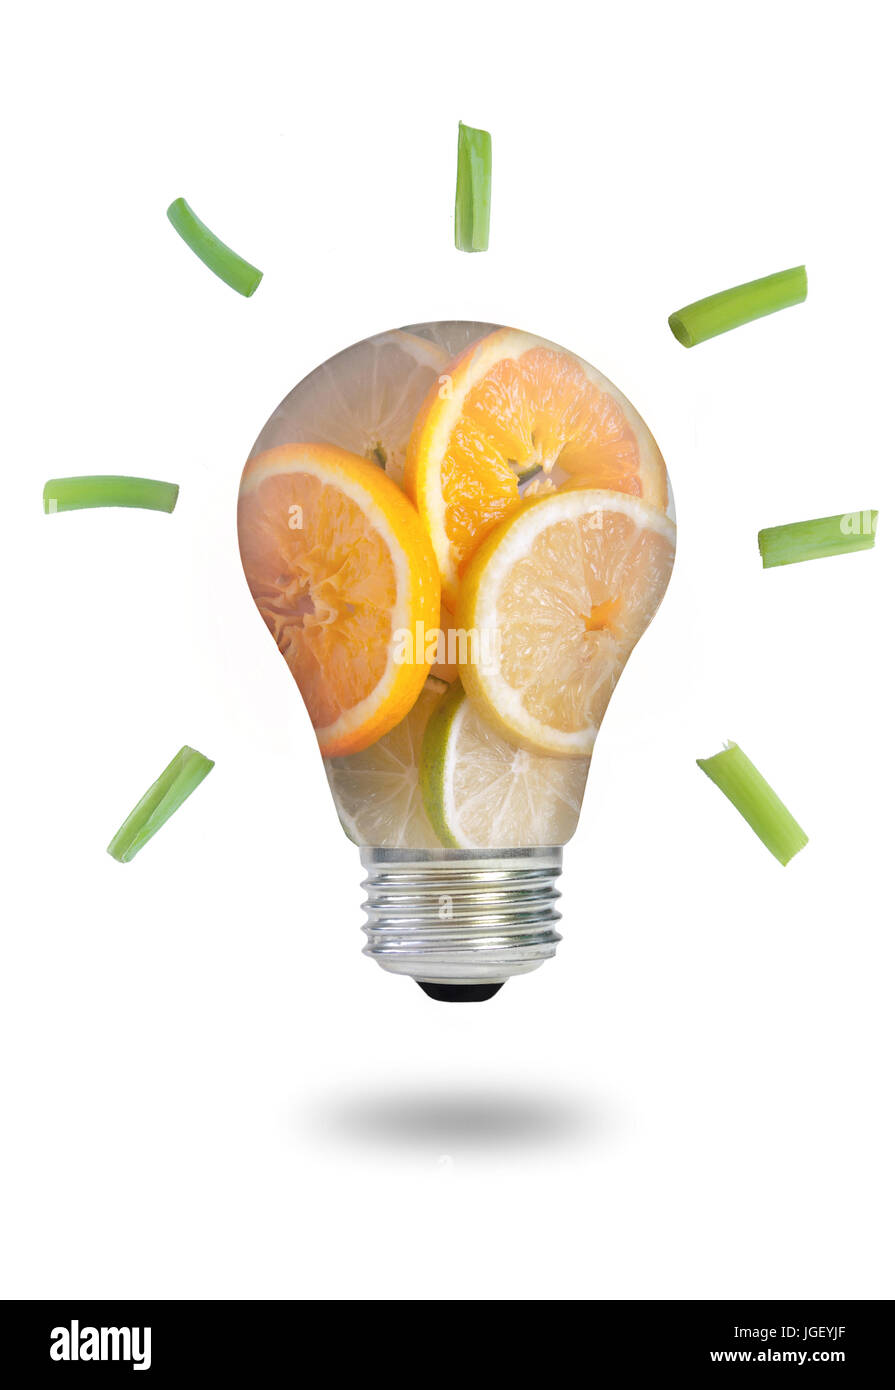 Light bulb made of fruits and vegetables over a white background Stock Photo